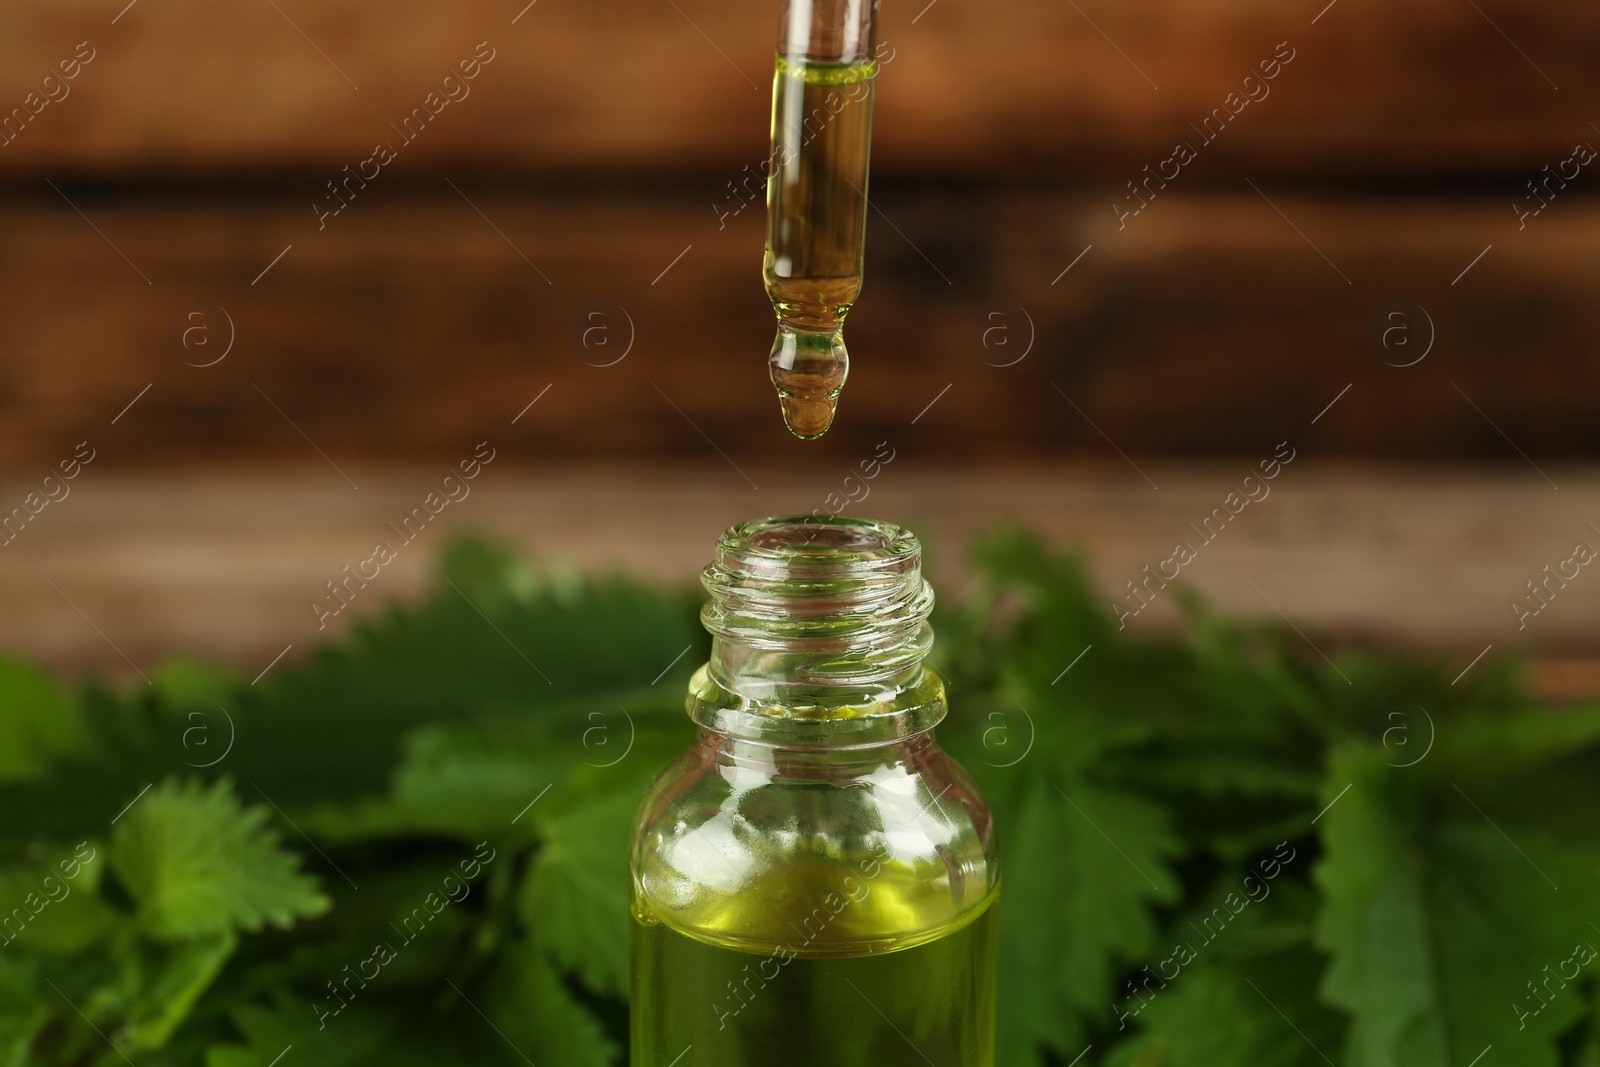 Photo of Dripping nettle oil from pipette into glass bottle and leaves against wooden background, closeup